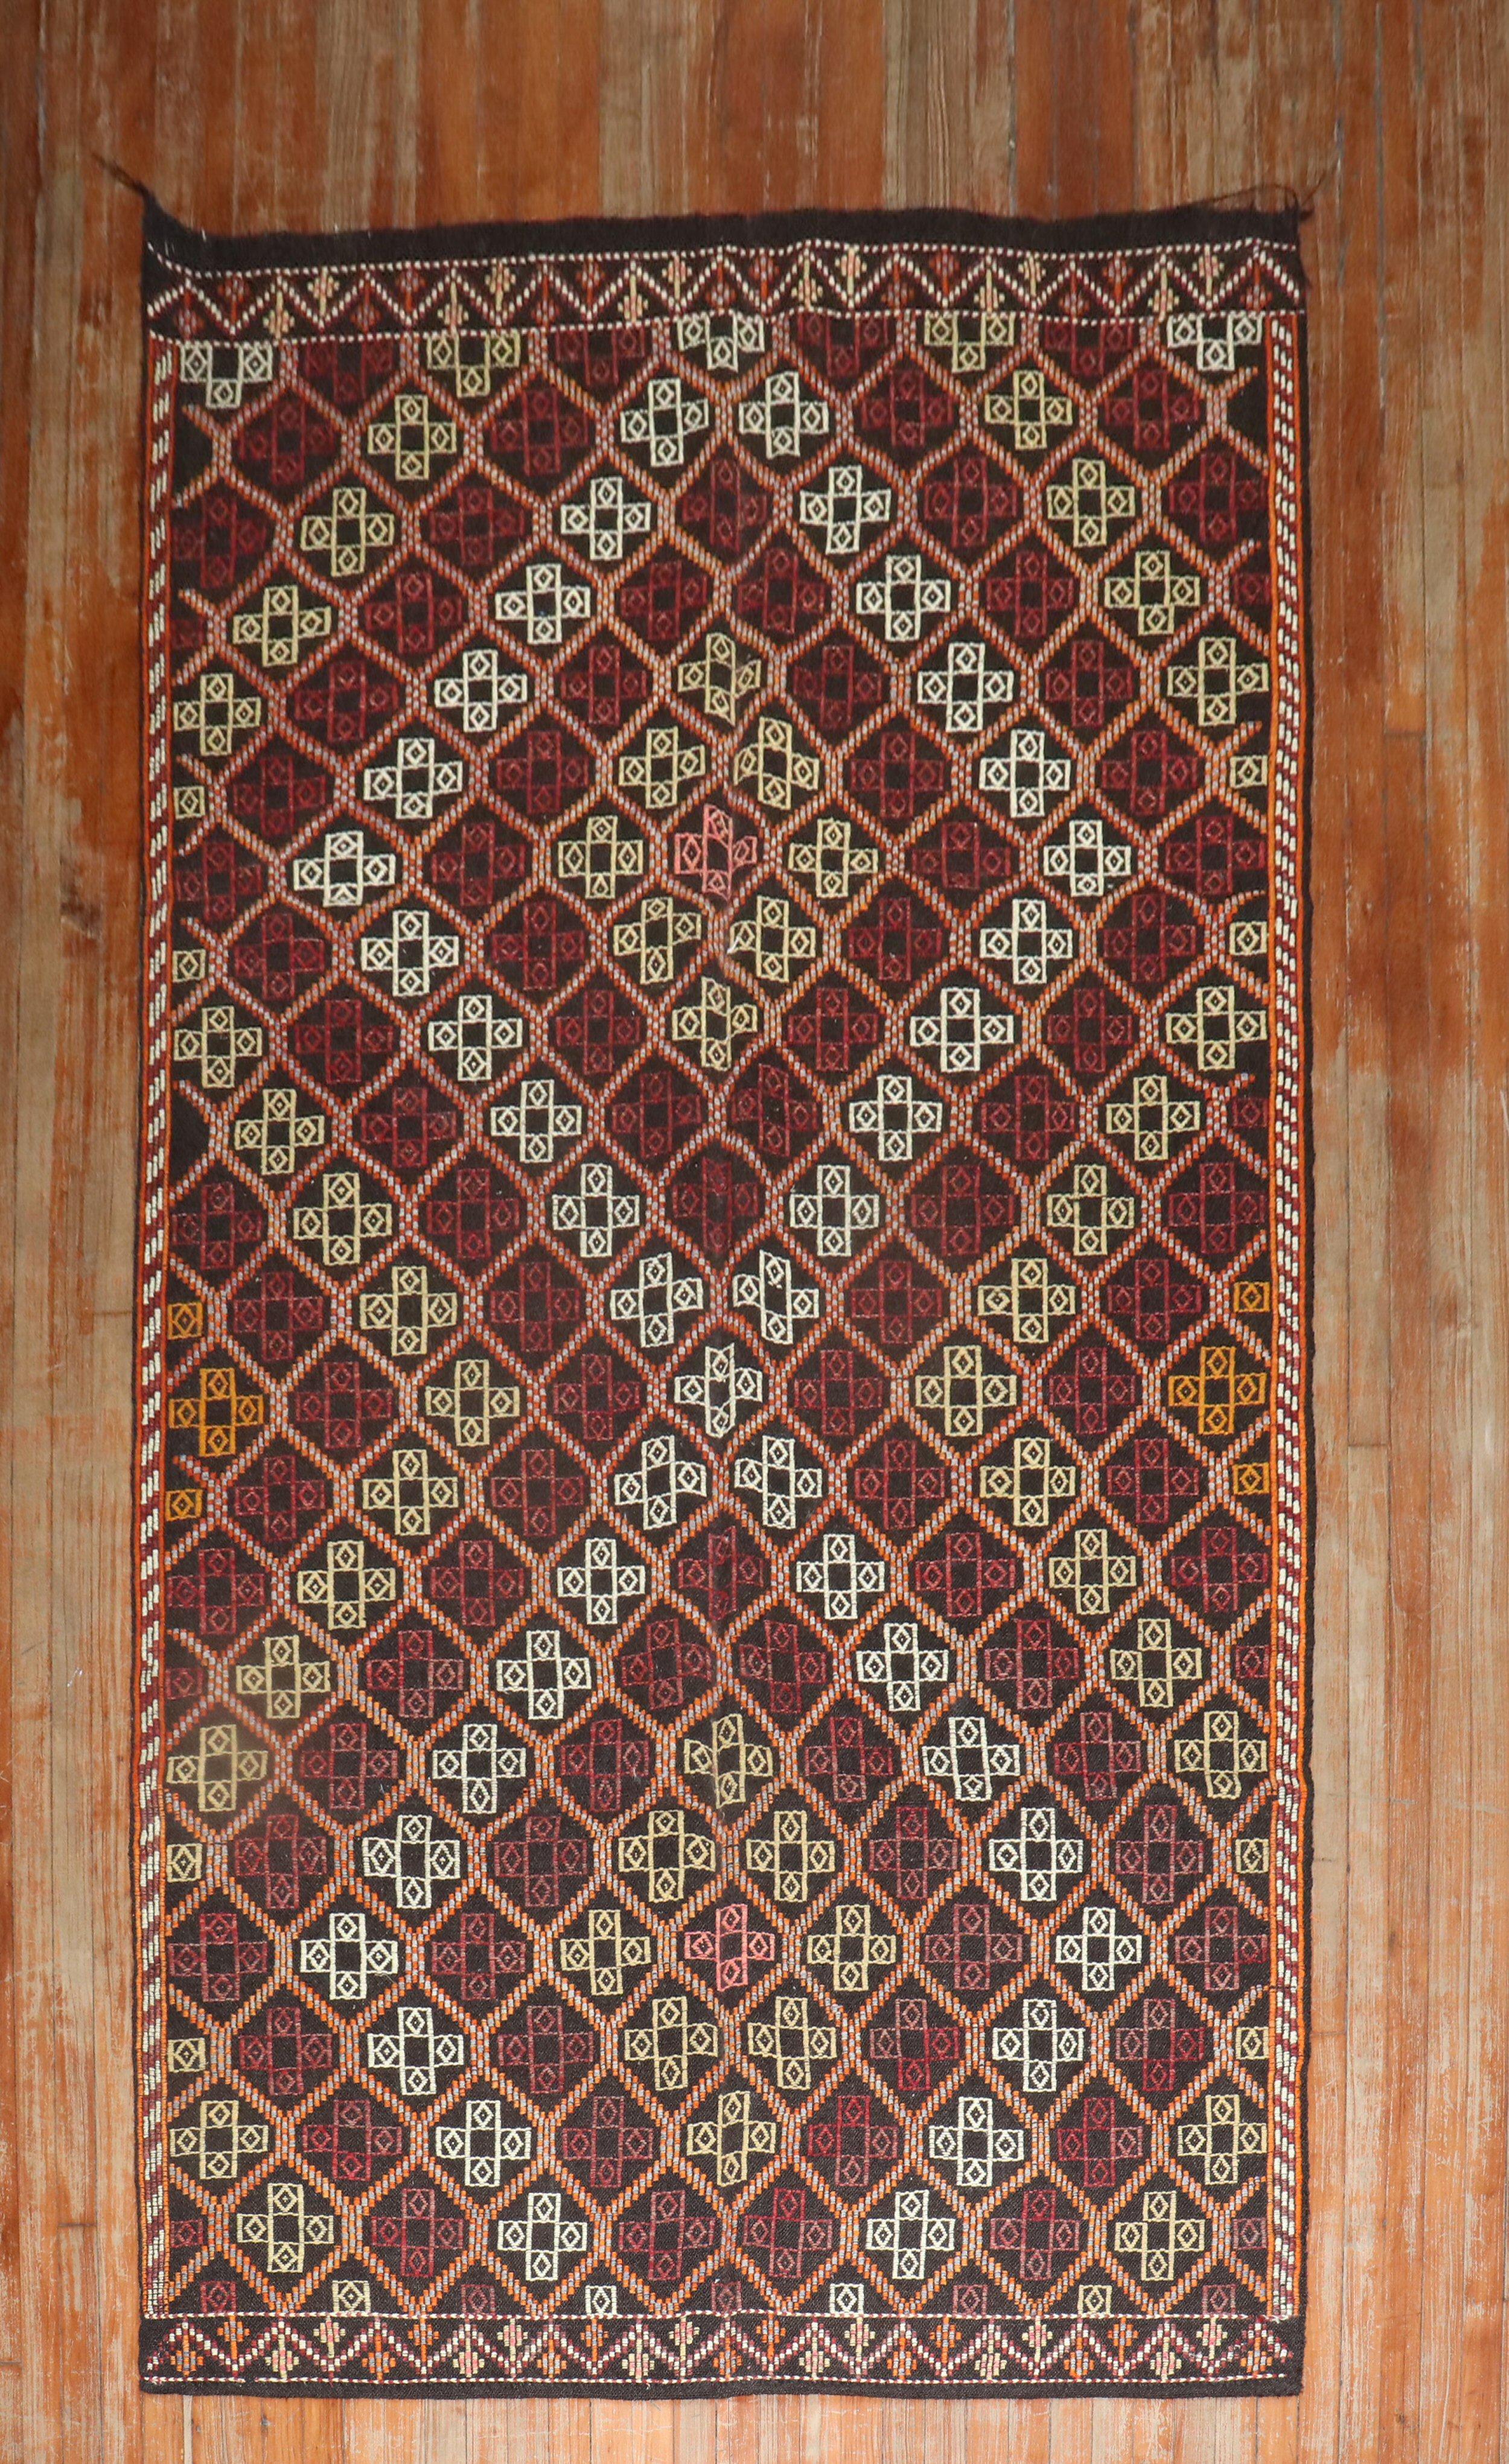 Mid-20th Century Tribal Turkish Jajim kilim in dark colors

Measures: 5'4” x 10'2”

With the Jijim weaving technique, different colored threads are applied between the weft and warp threads, on the reverse of the weave. It is often used to